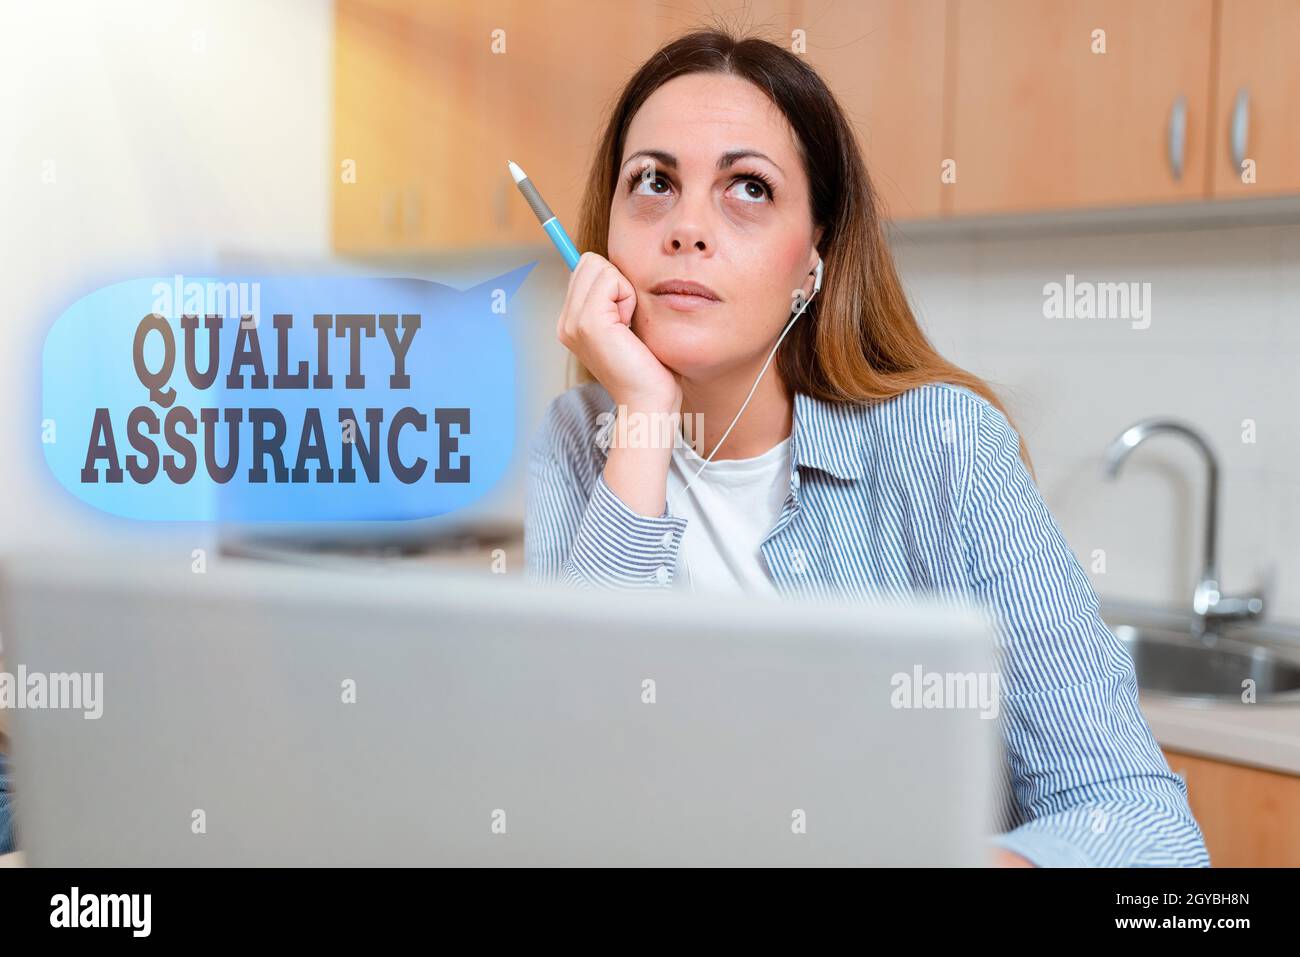 Sign displaying Quality Assurance, Word Written on preventing mistakes and defects in manufactured products Abstract Working At Home Ideas, Interior D Stock Photo